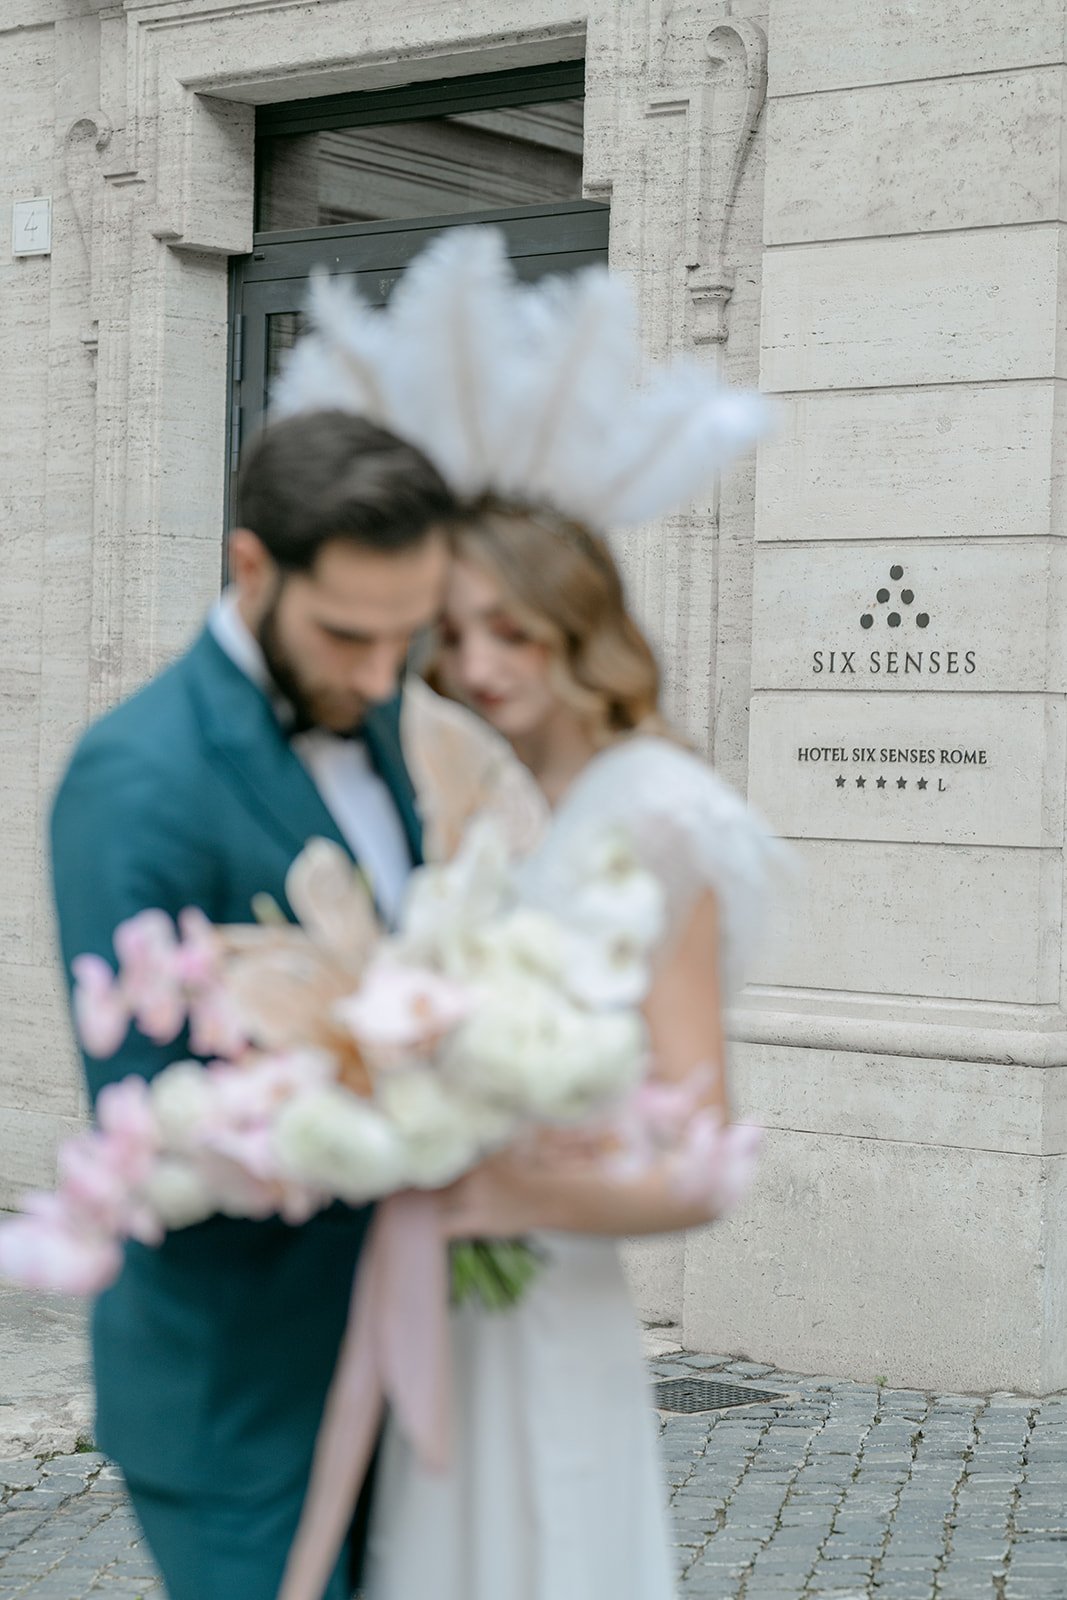 getting married at six senses in rome : wedding photographer.jpg